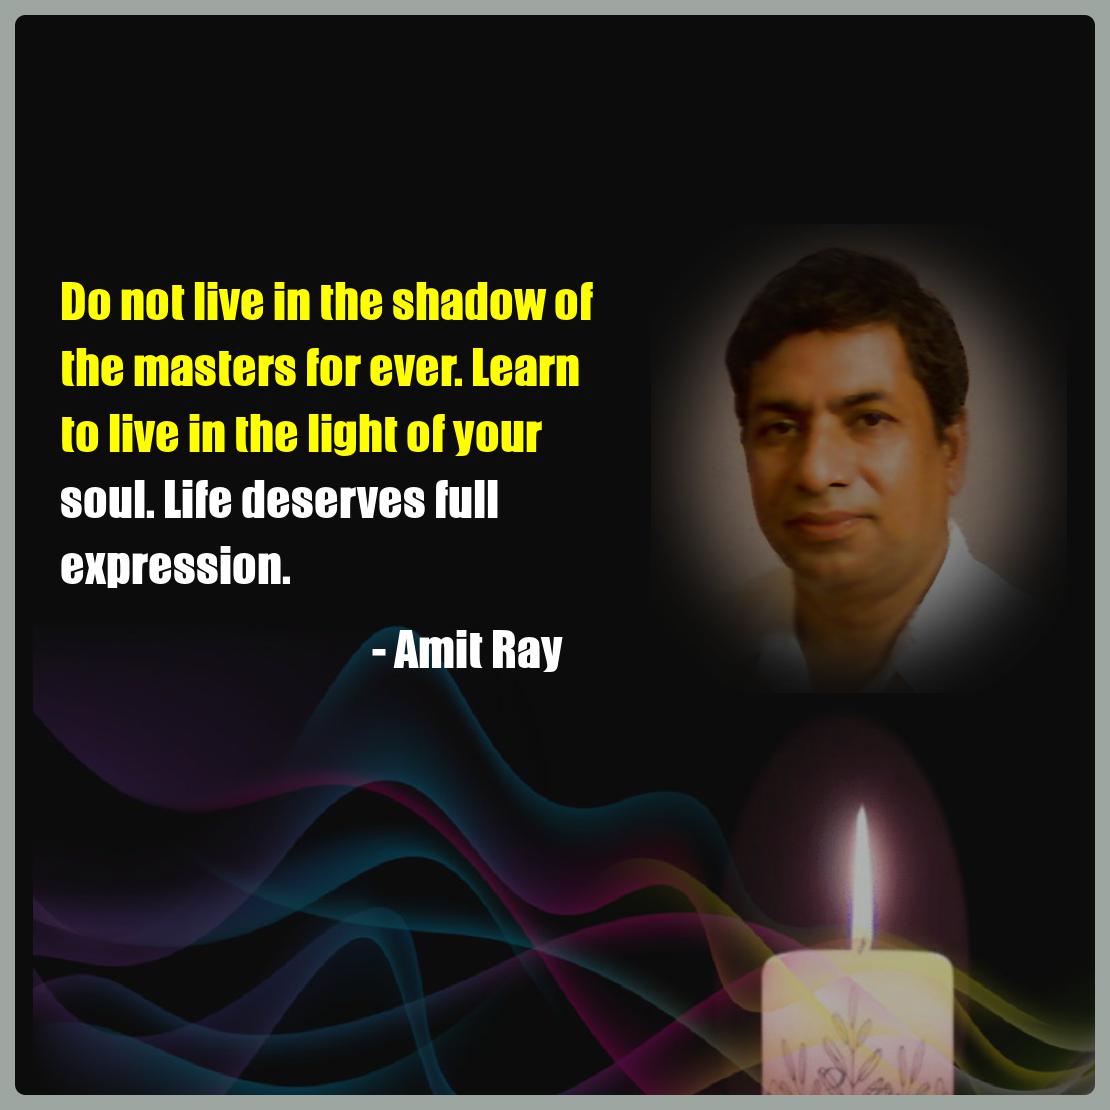 Do not live in the shadow of the masters for ever. Learn to live in the light of your soul. Life deserves full expression. -- Amit Ray